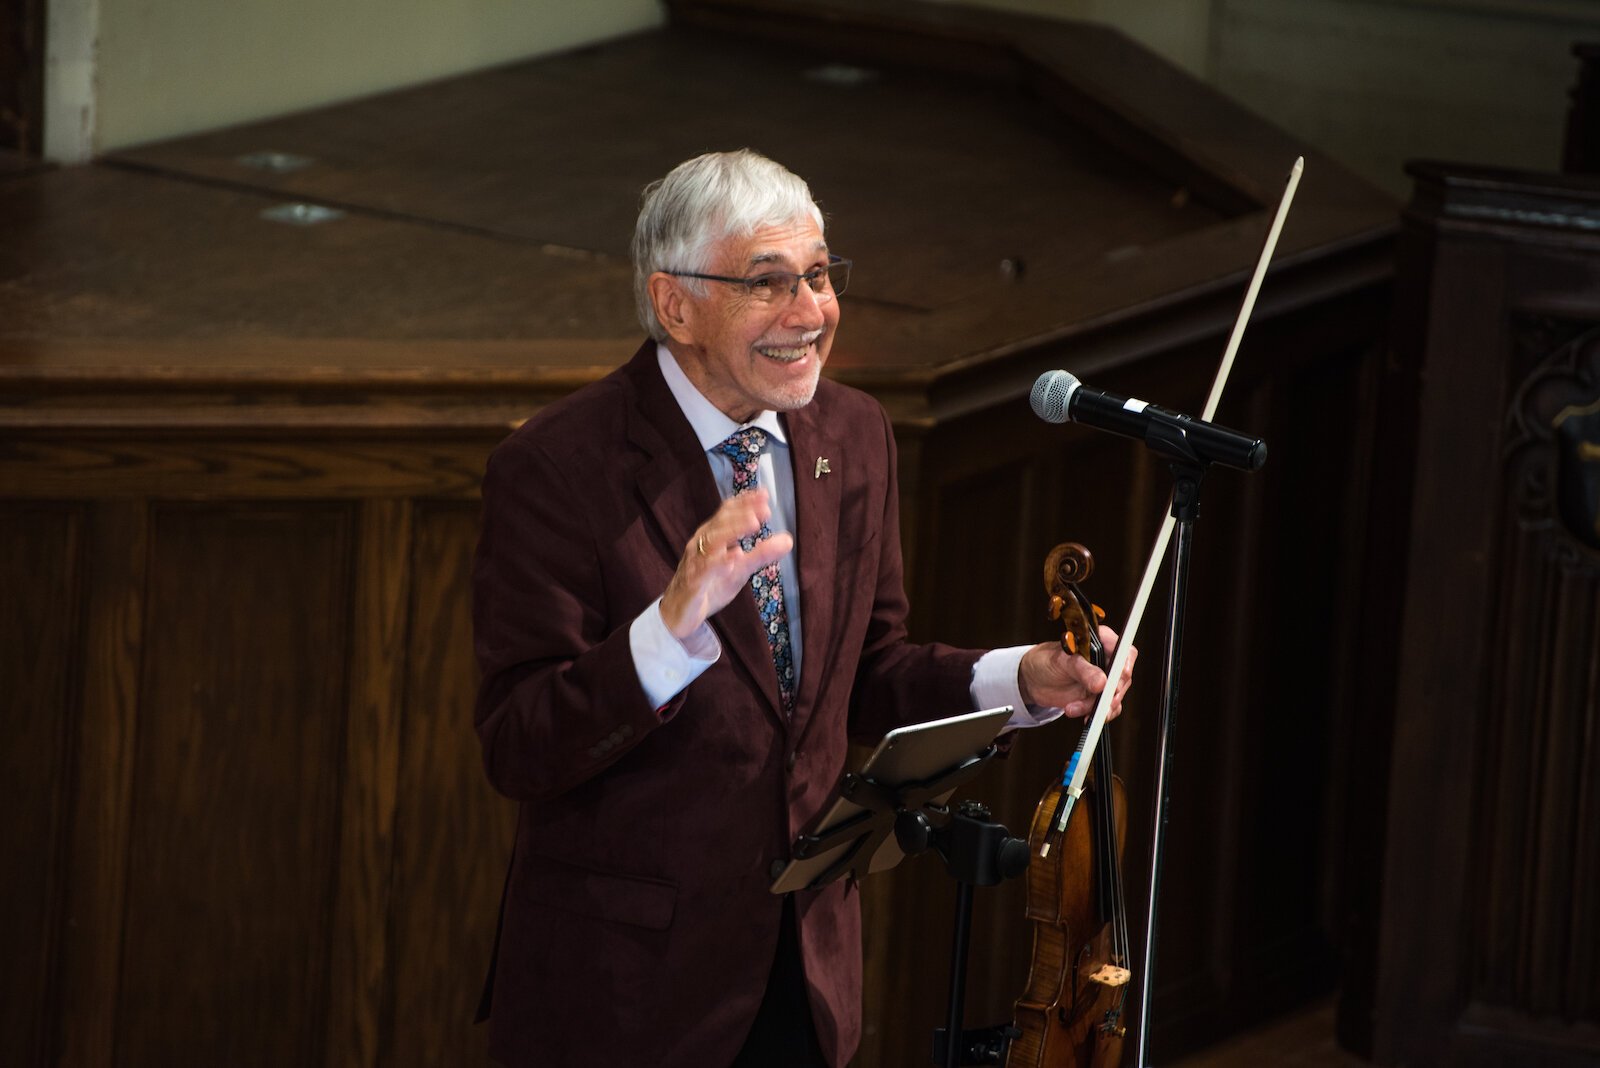 Dr. Barry Ross, concertmaster emeritus of the Kalamazoo Symphony Orchestra, performed at KNAC's fund drive announcement.